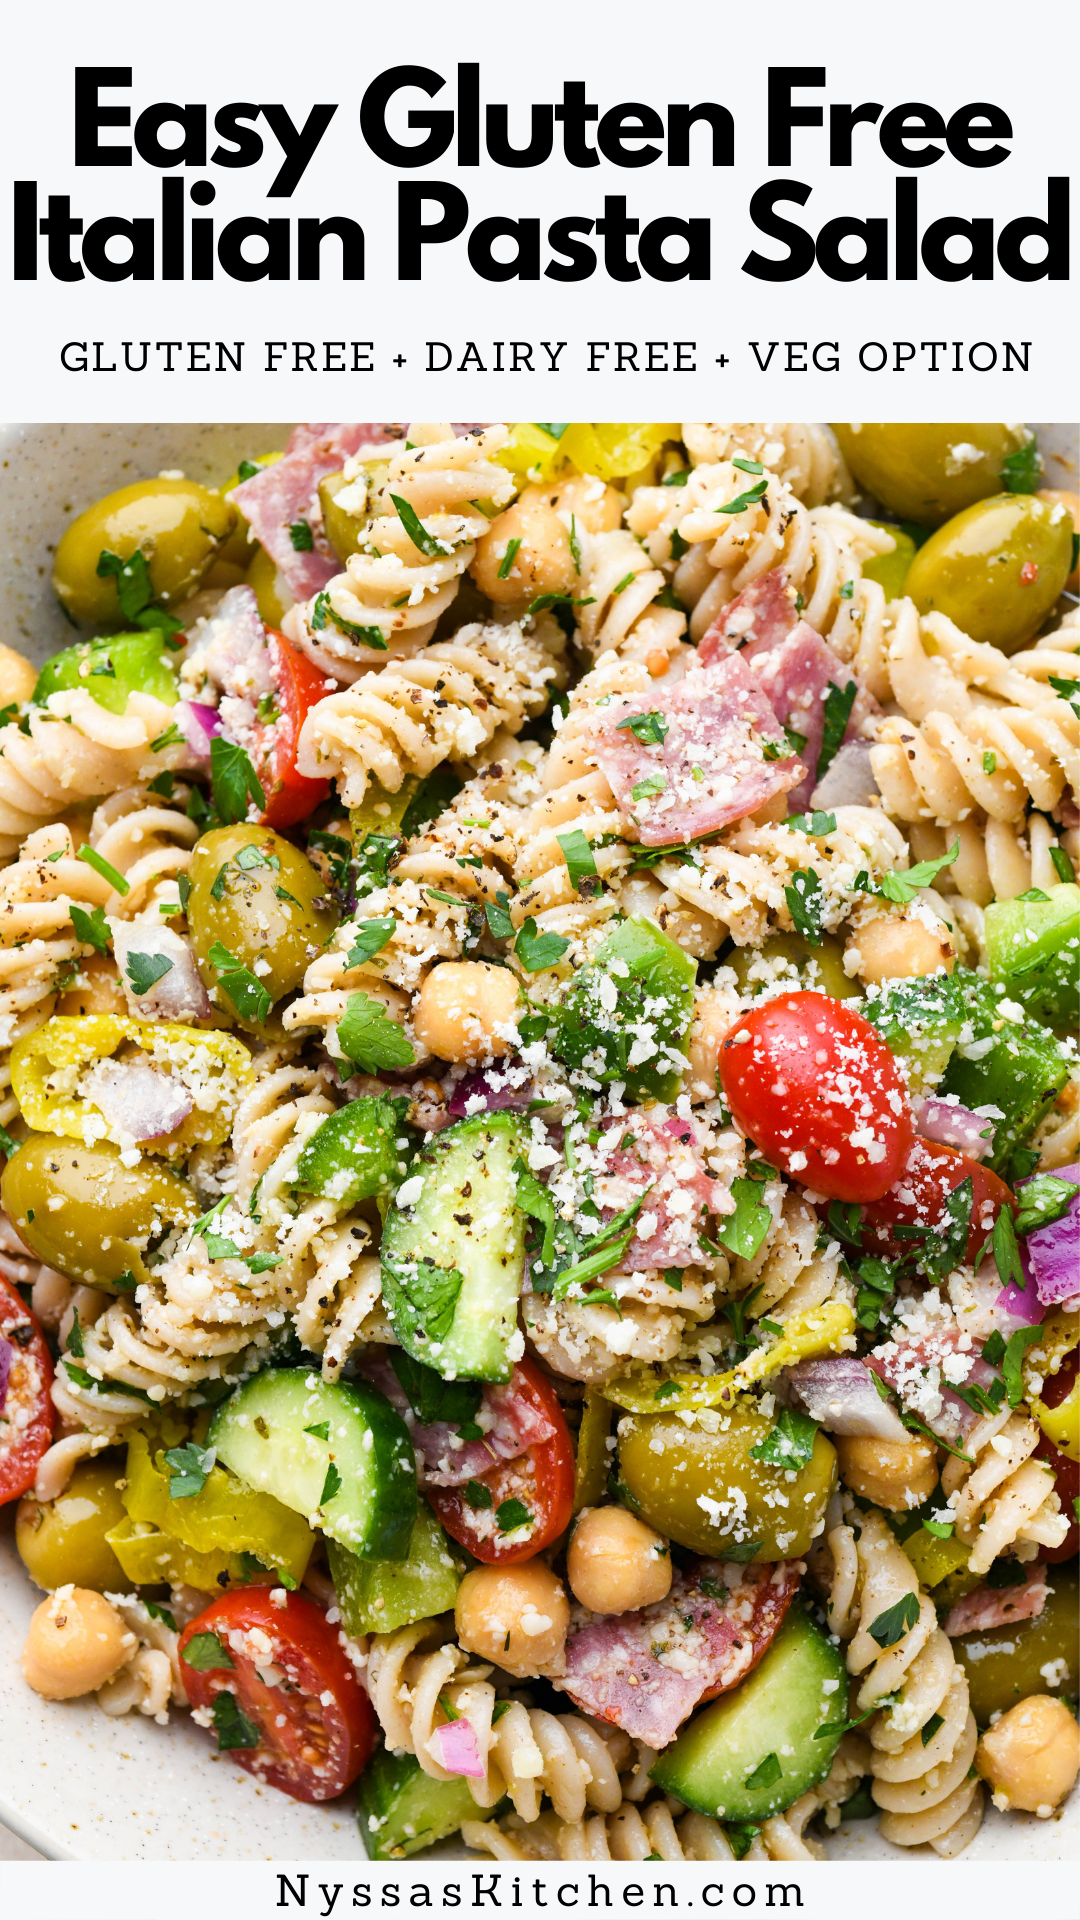 This fresh and easy gluten free Italian pasta salad is the best satisfying side dish! Made with a mouthwatering homemade Italian dressing (with no mayo), fresh veggies, herbs, parmesan cheese, olives, and sliced salami or pepperoni. Perfect for summer BBQ's! Vegan, vegetarian and dairy free option.